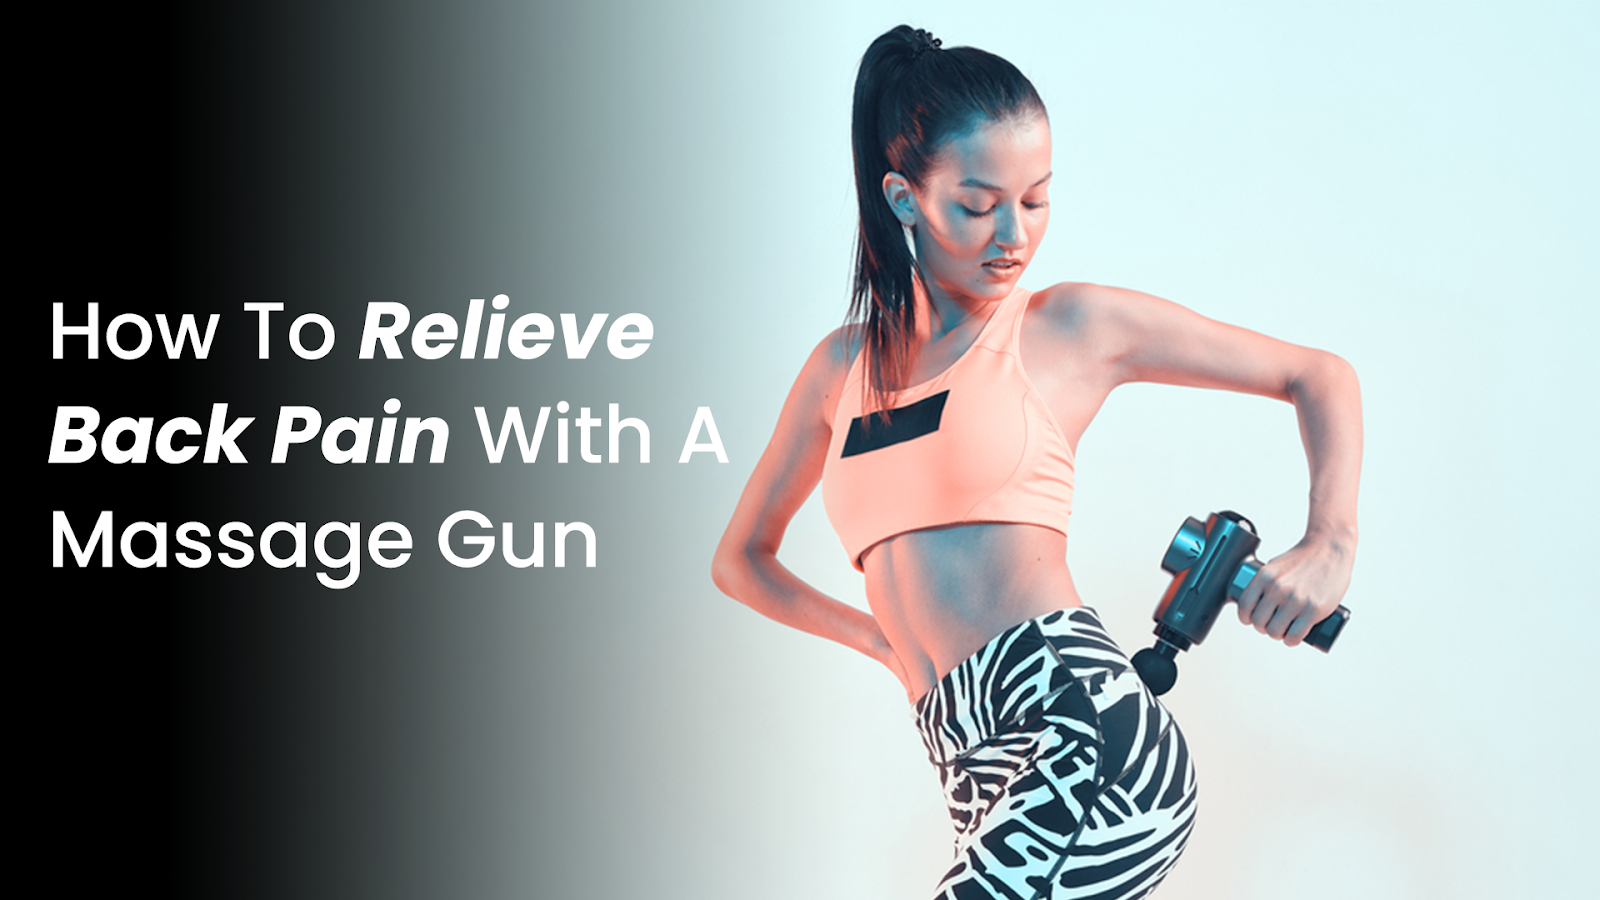 How to massage relax back muscle group with massage gun - SoonPam